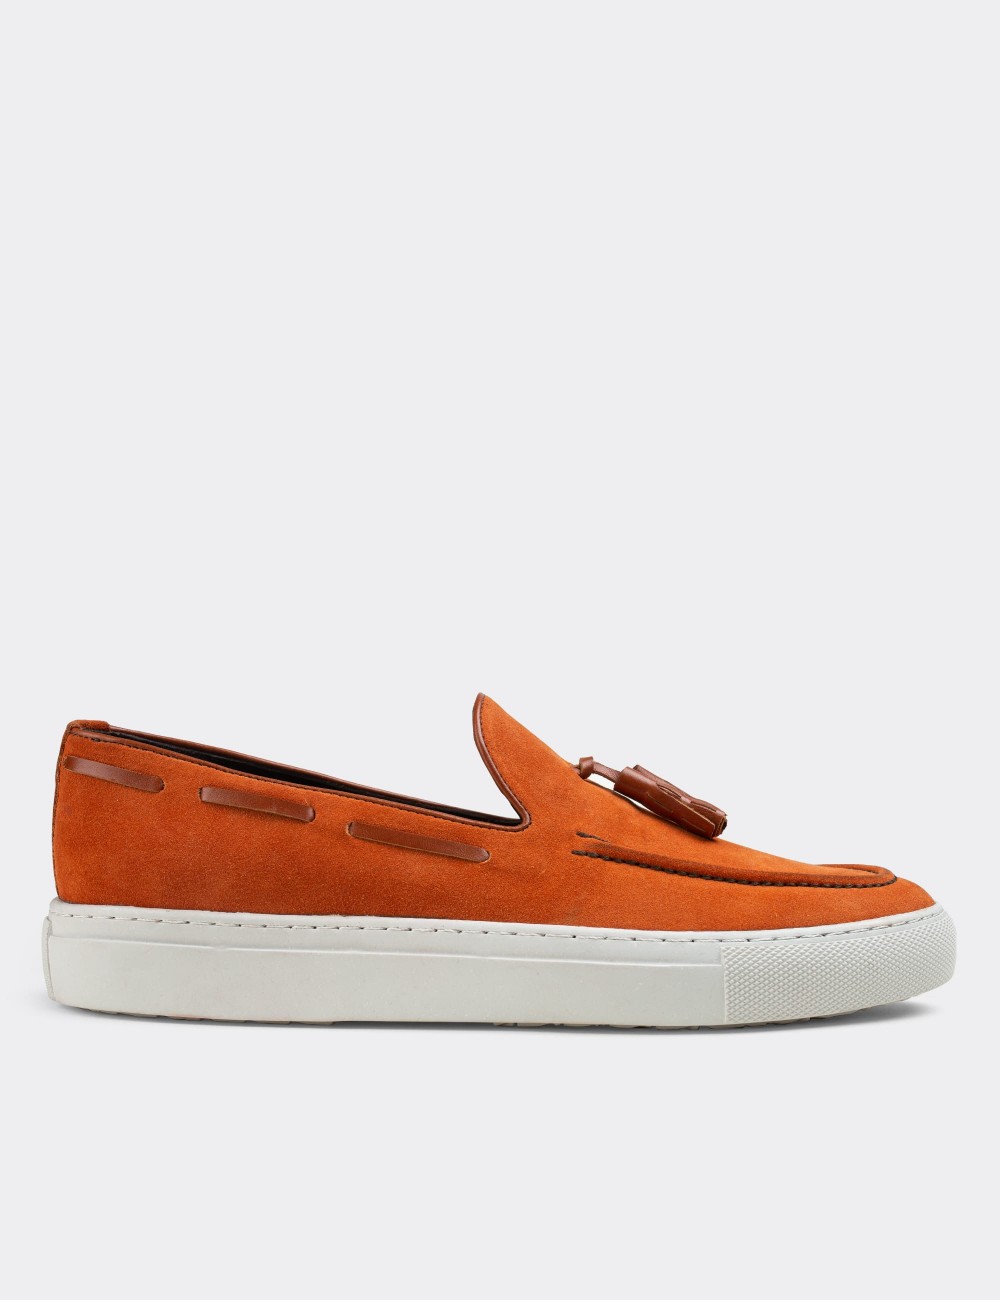 Orange Suede Leather Sneakers - 01836MTRCC01